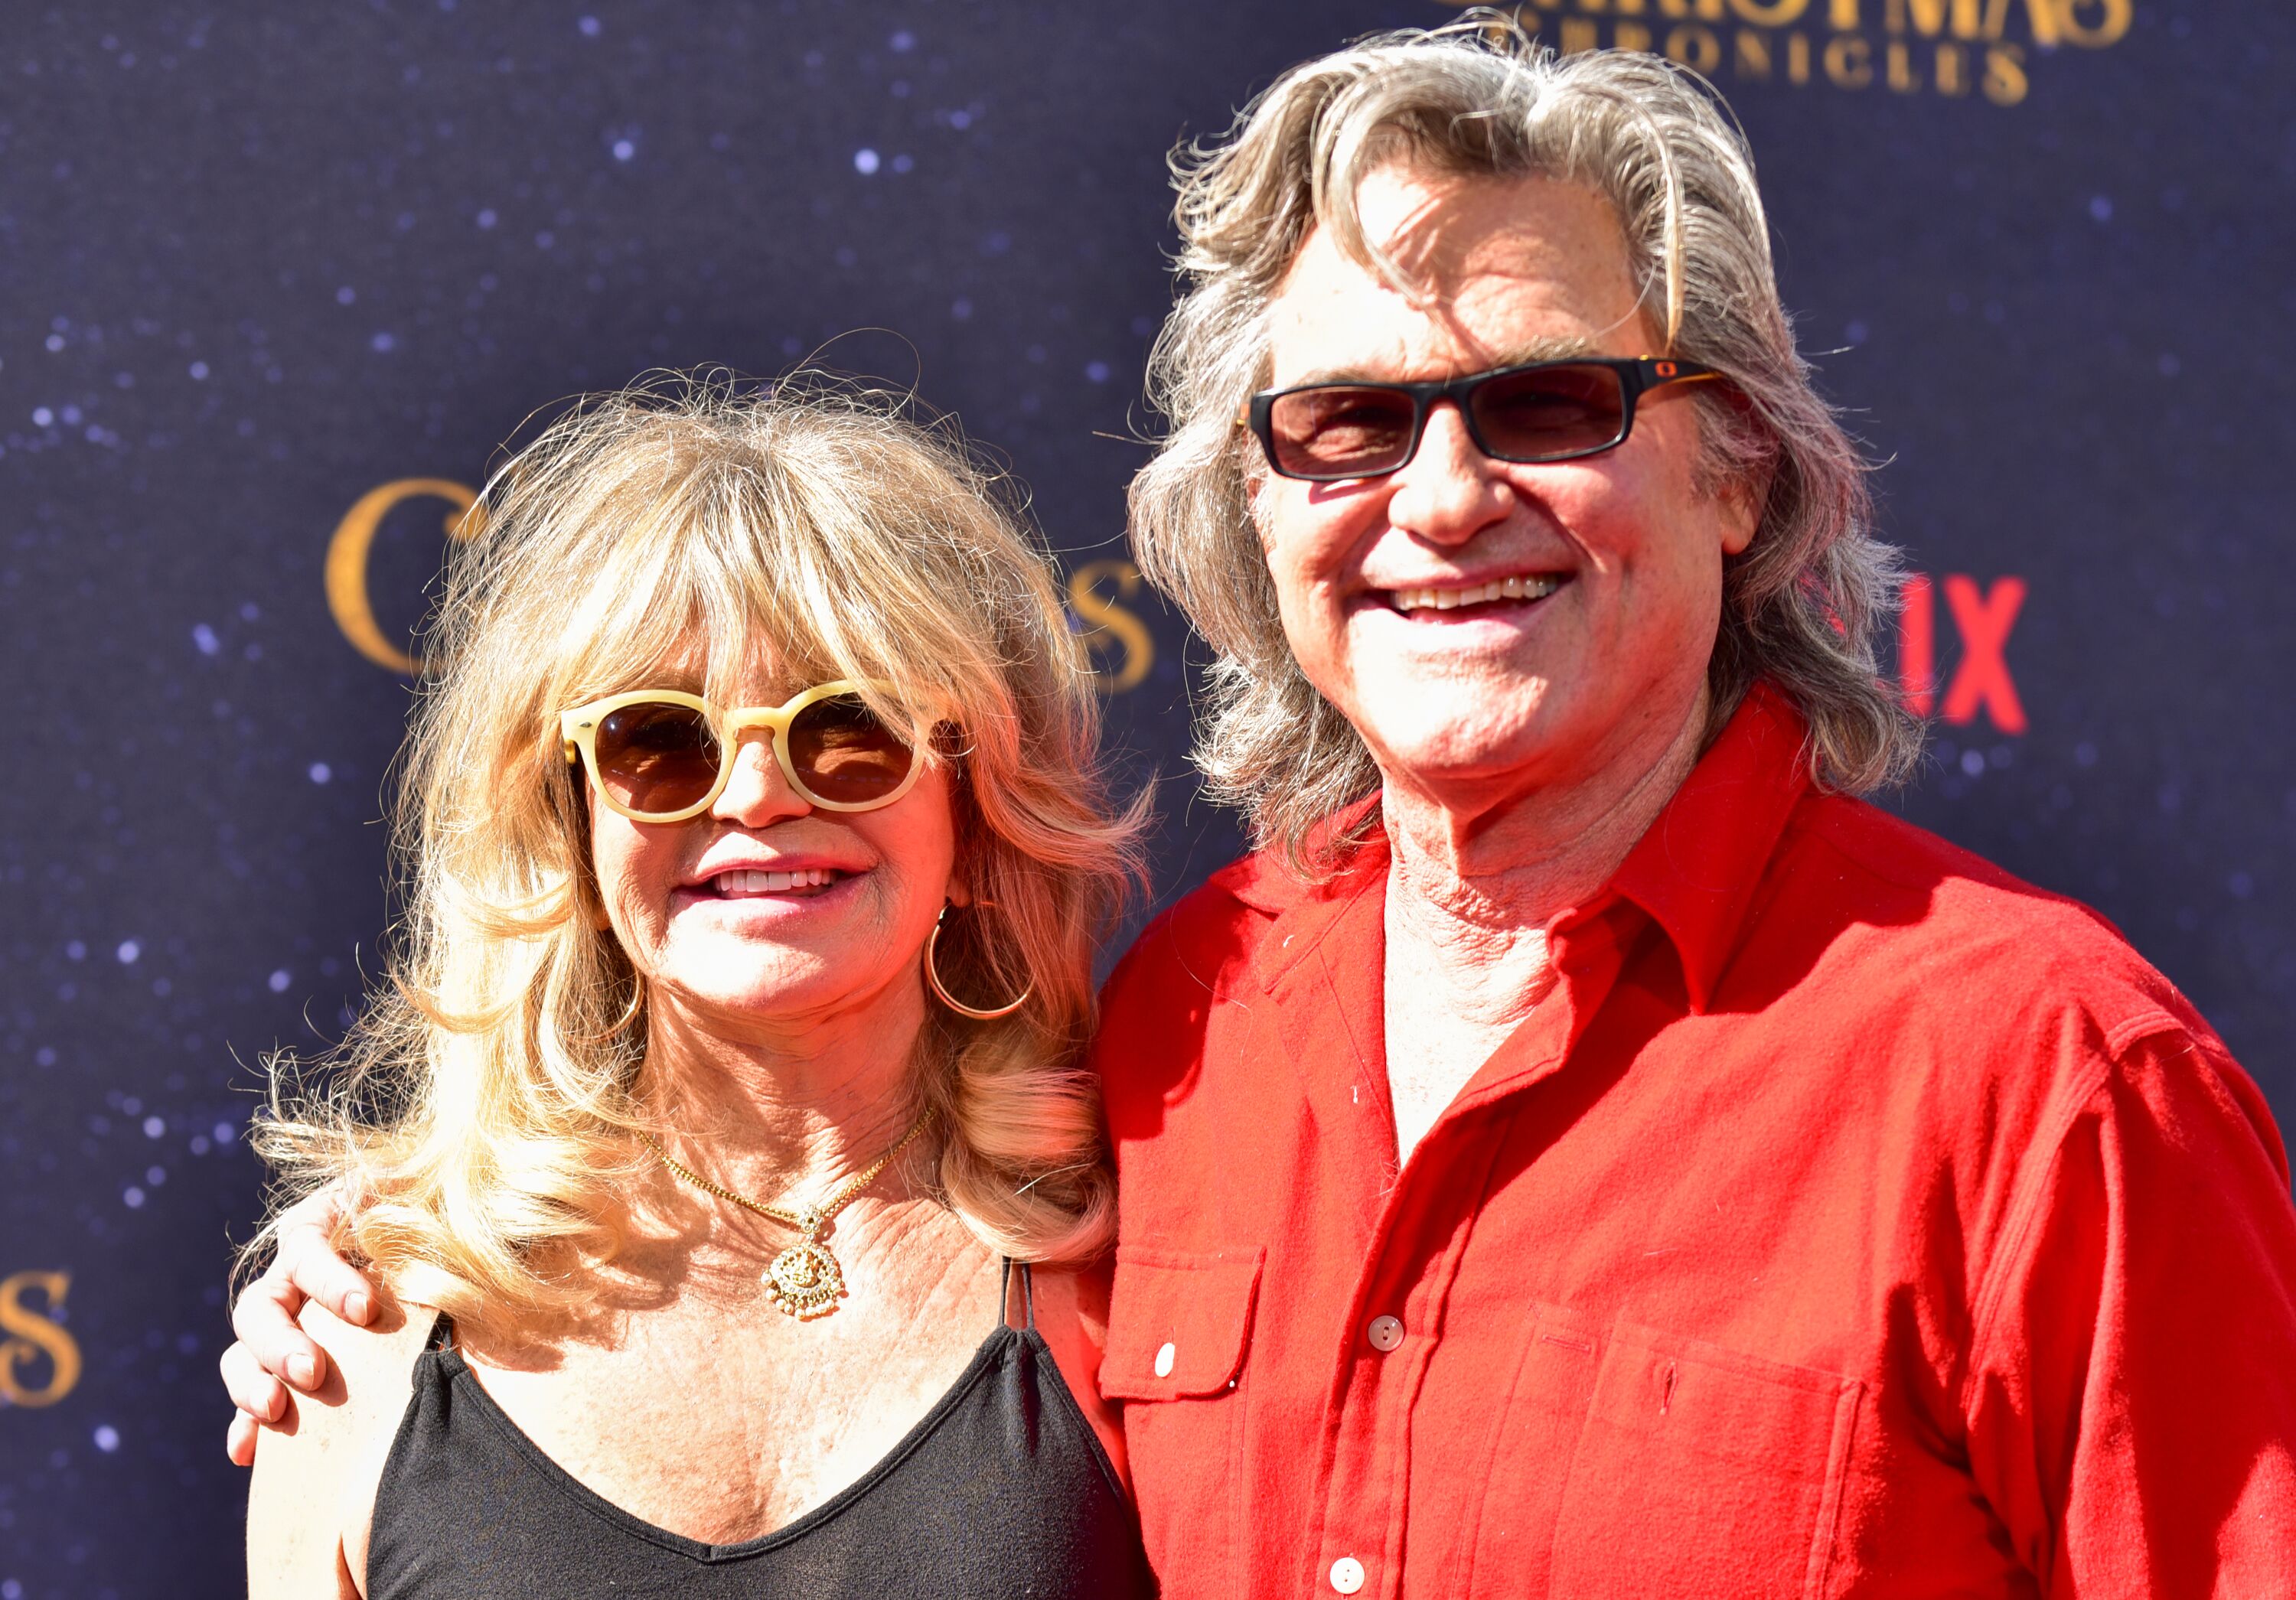 Goldie Hawn and Kurt Russell at the premiere of "The Christmas Chronicles." | Source: Getty Images